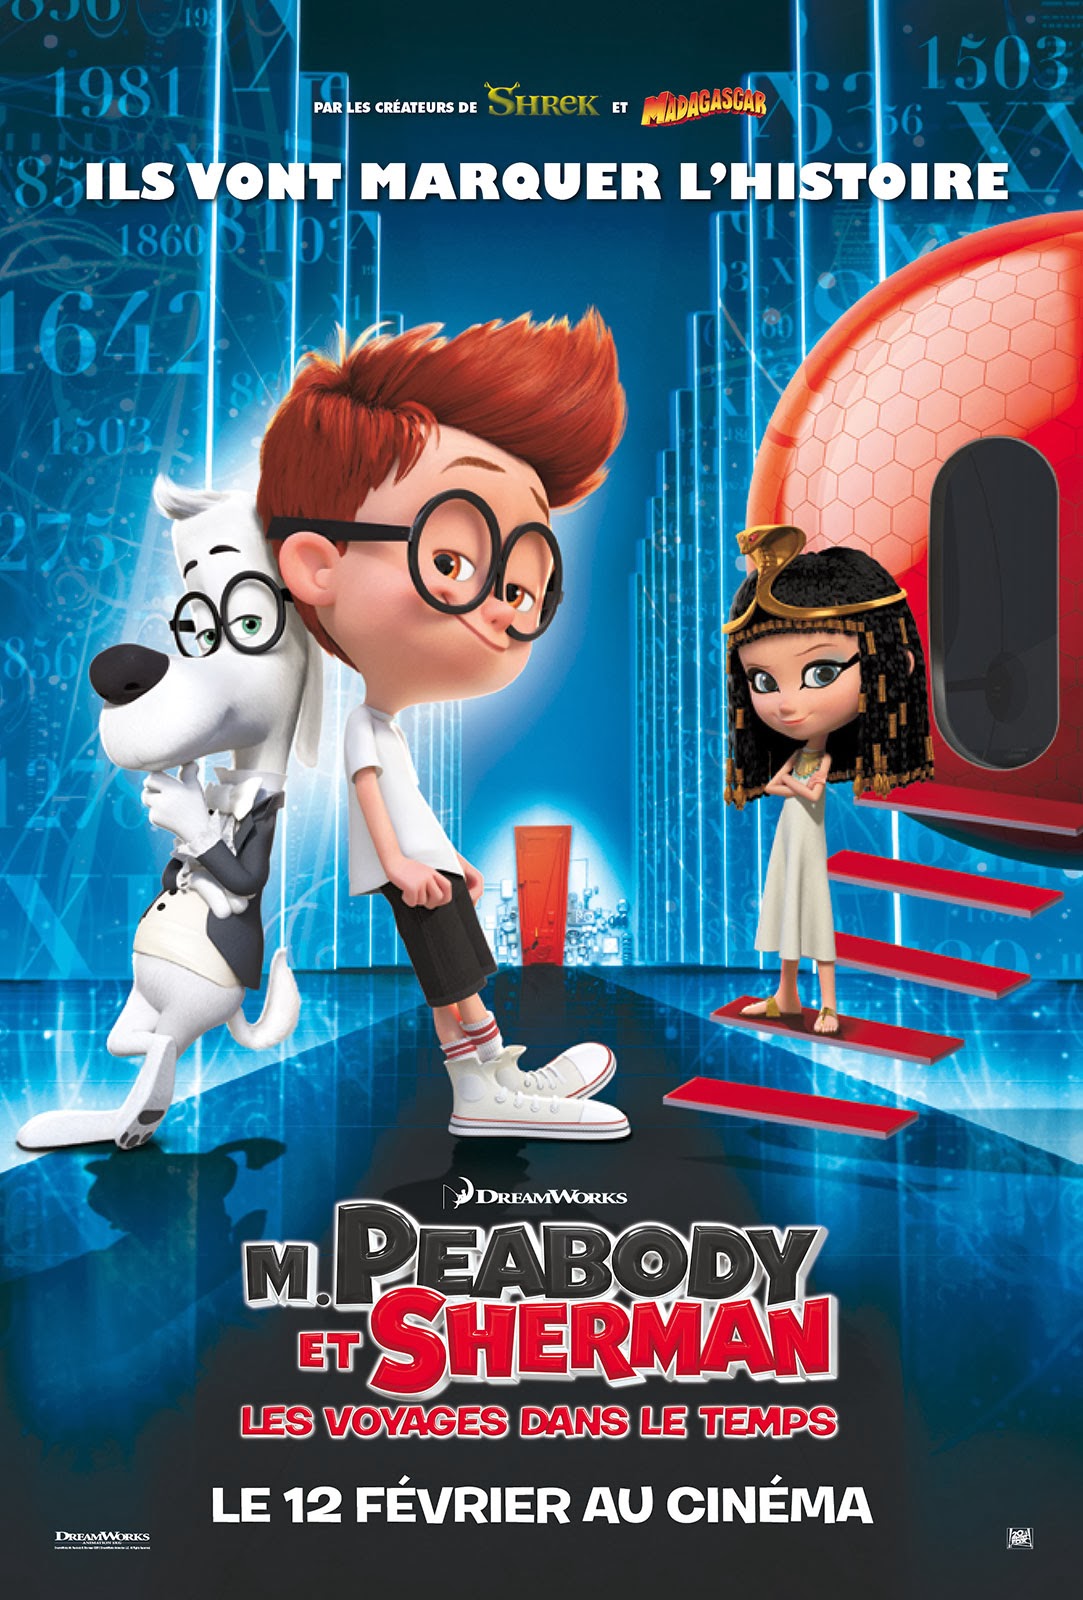 http://fuckingcinephiles.blogspot.fr/2014/02/critique-mr-peabody-and-sherman-les.html